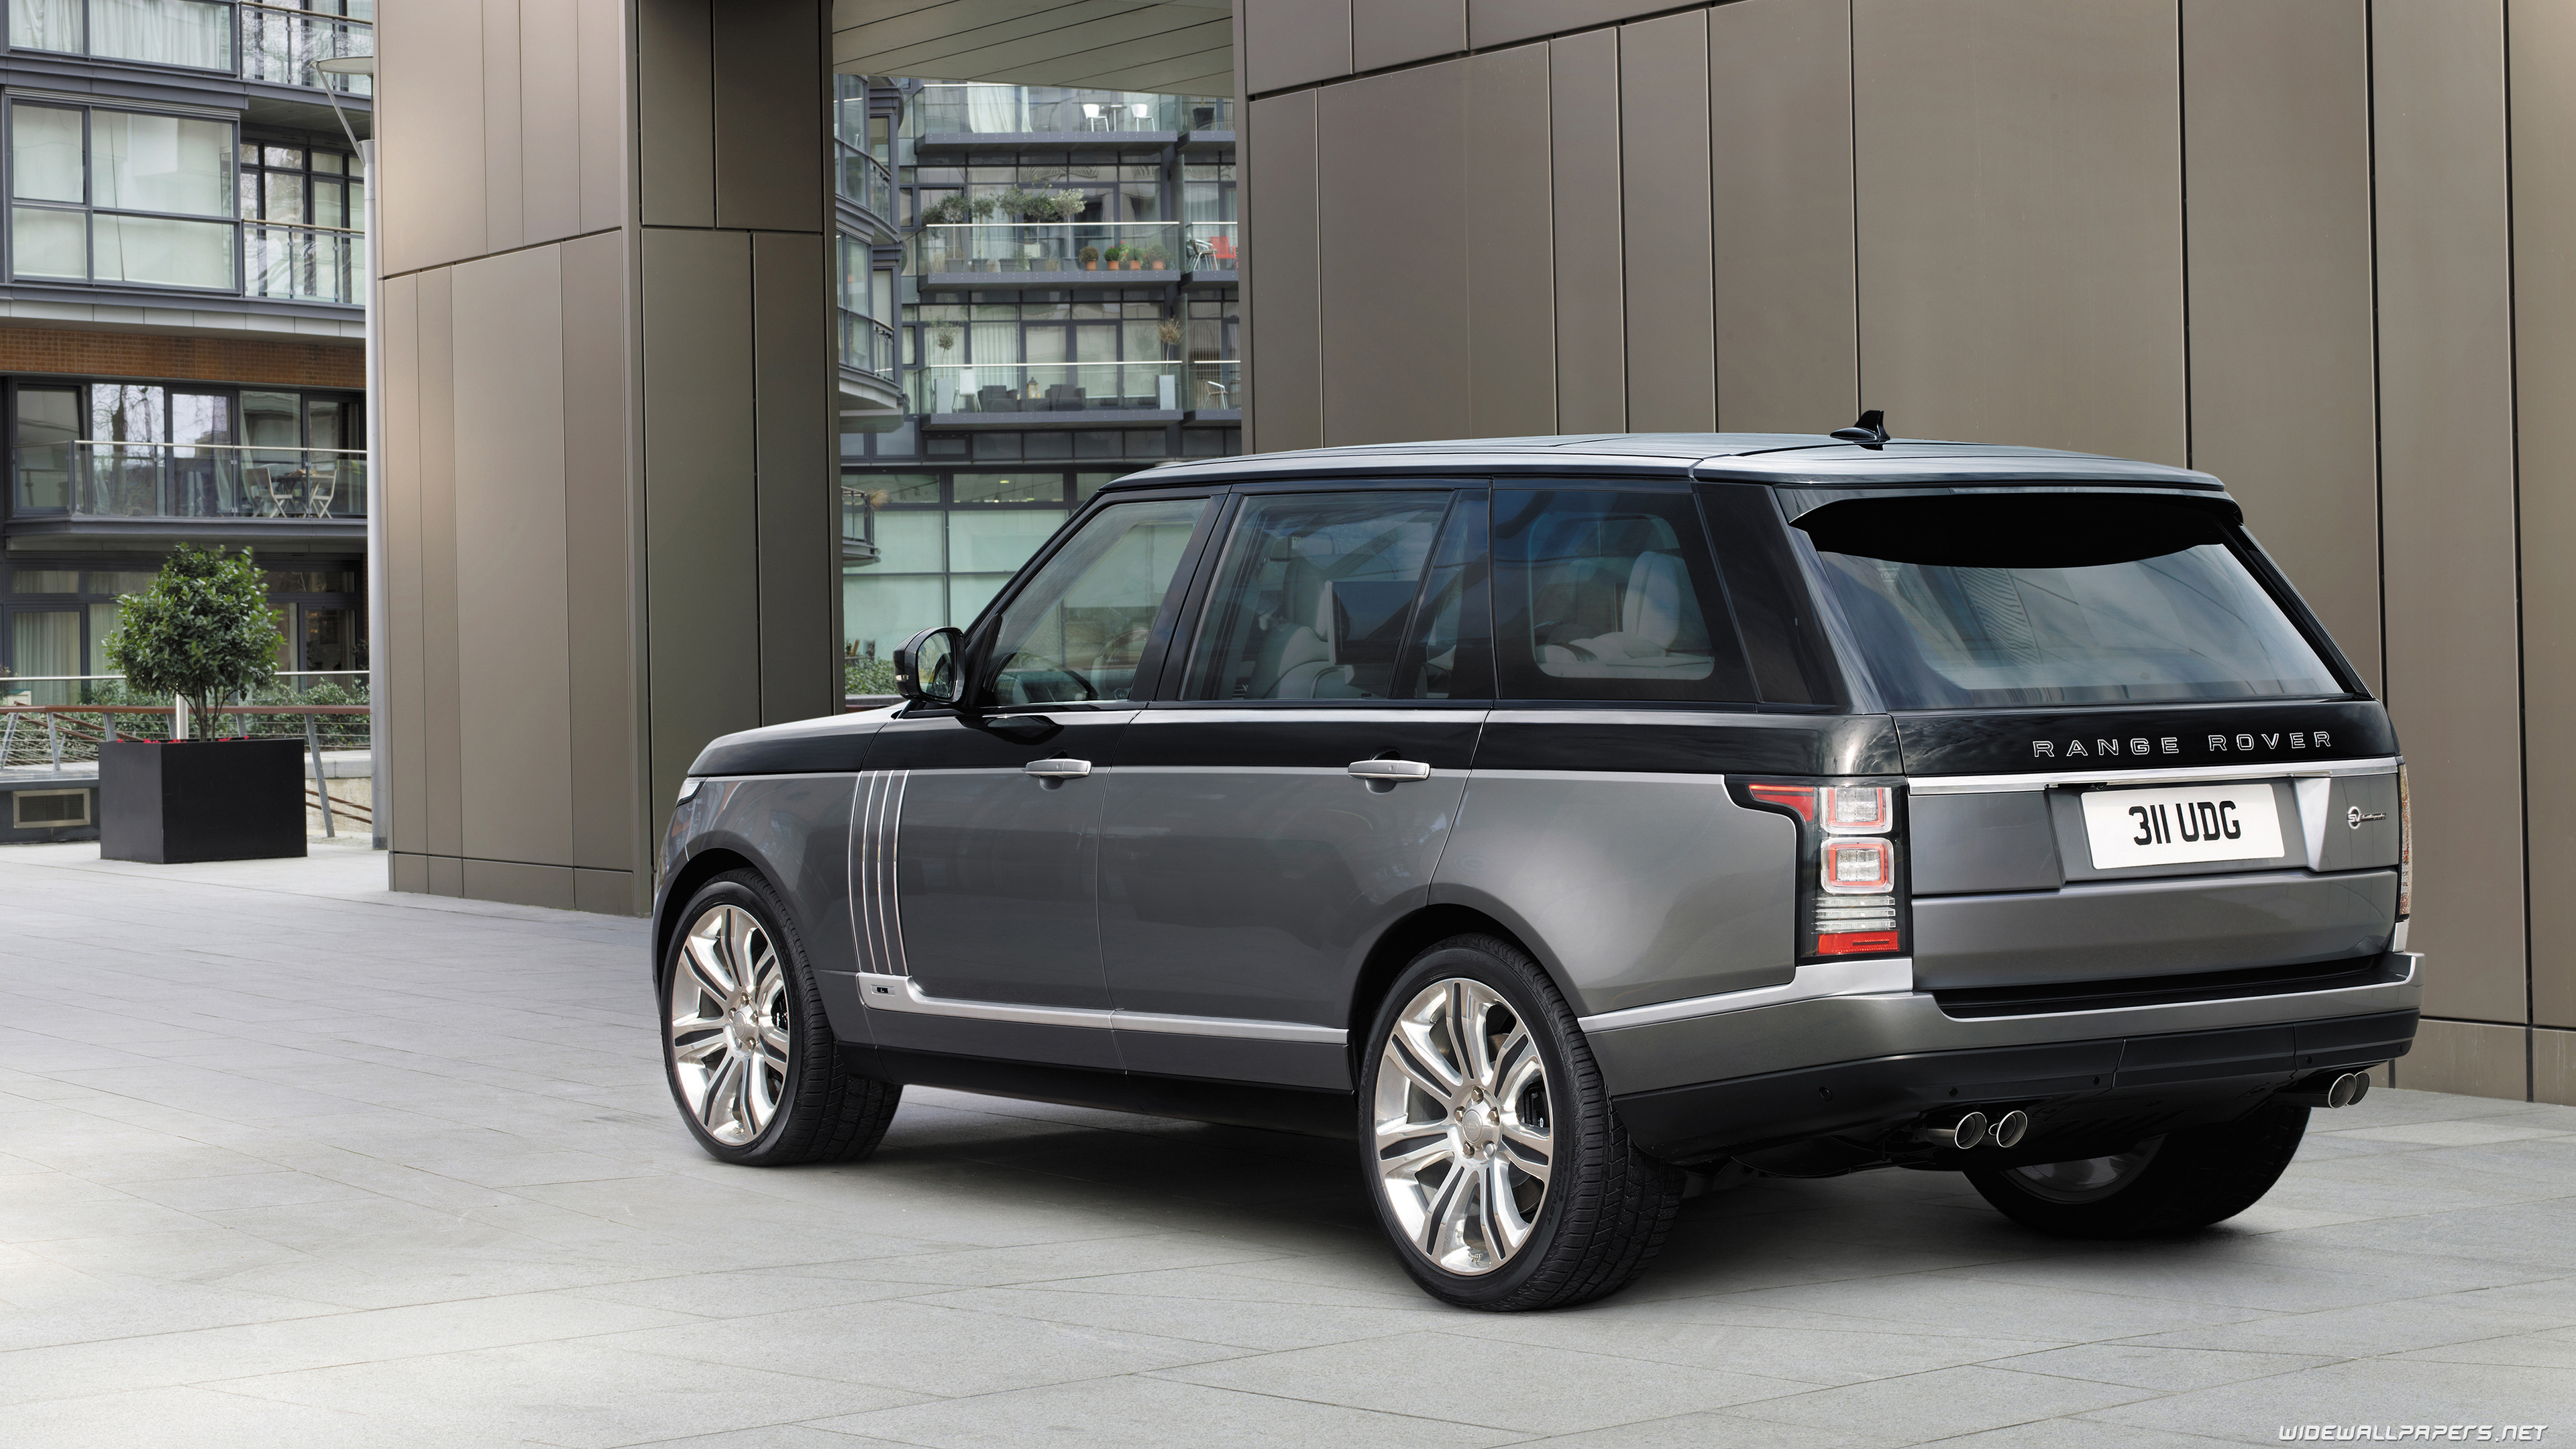 Limited Edition 2016 Range Rover - HD Wallpaper 